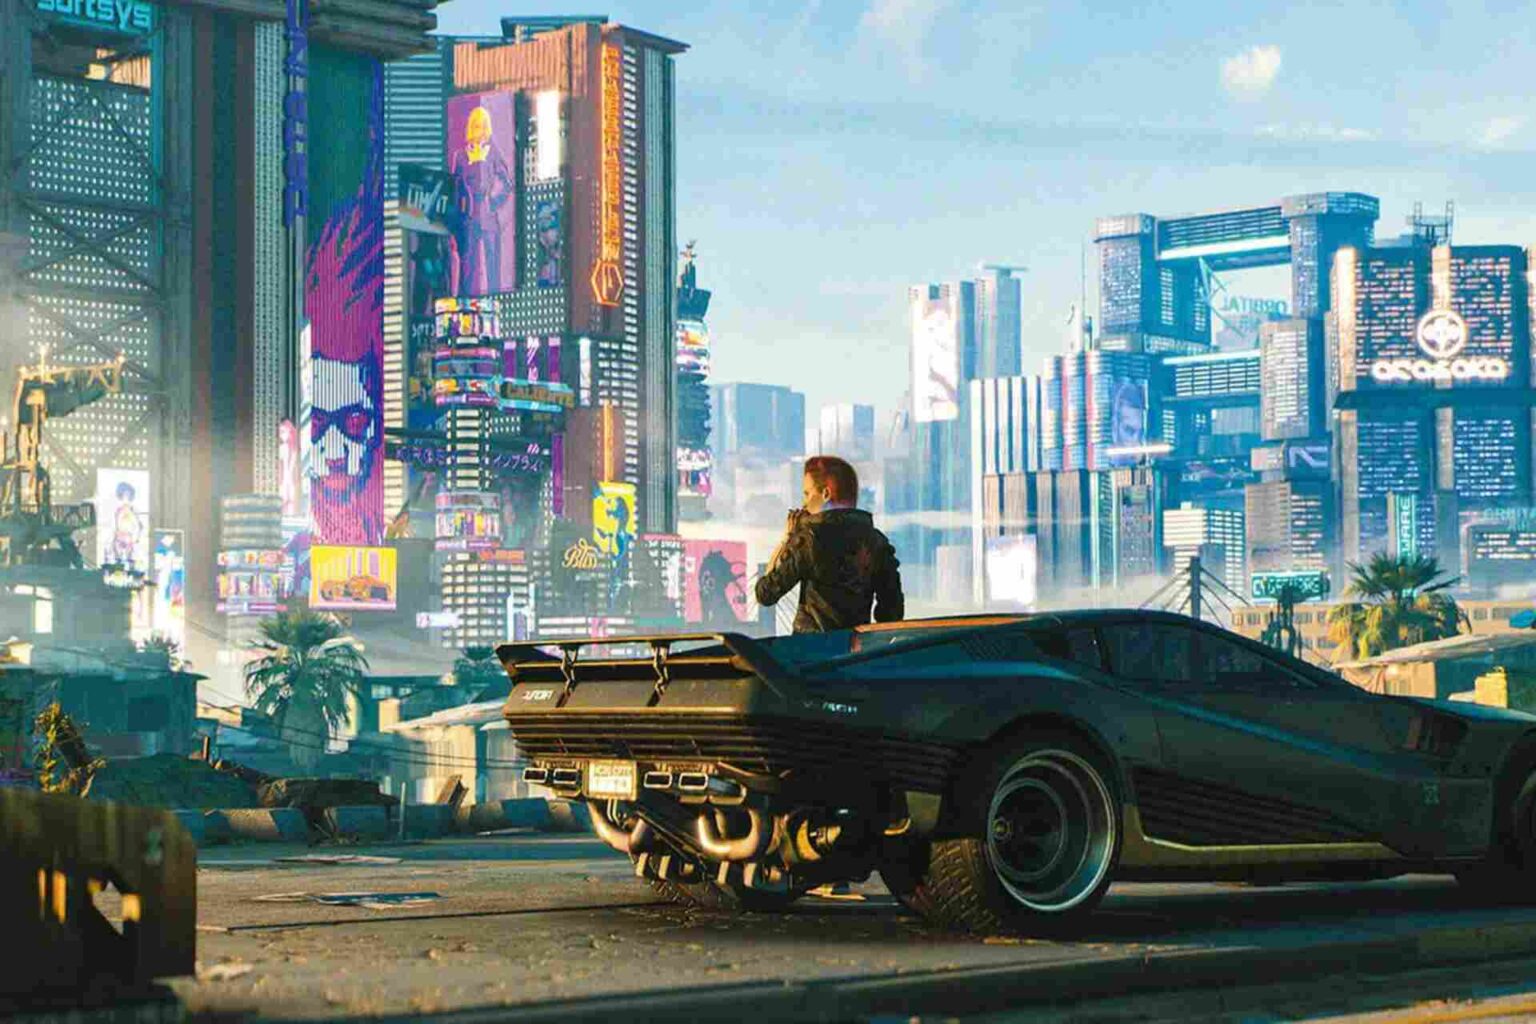 'Cyberpunk 2077' was expected to be the biggest video game blockbuster of 2020. What went wrong? Read these reviews before buying!